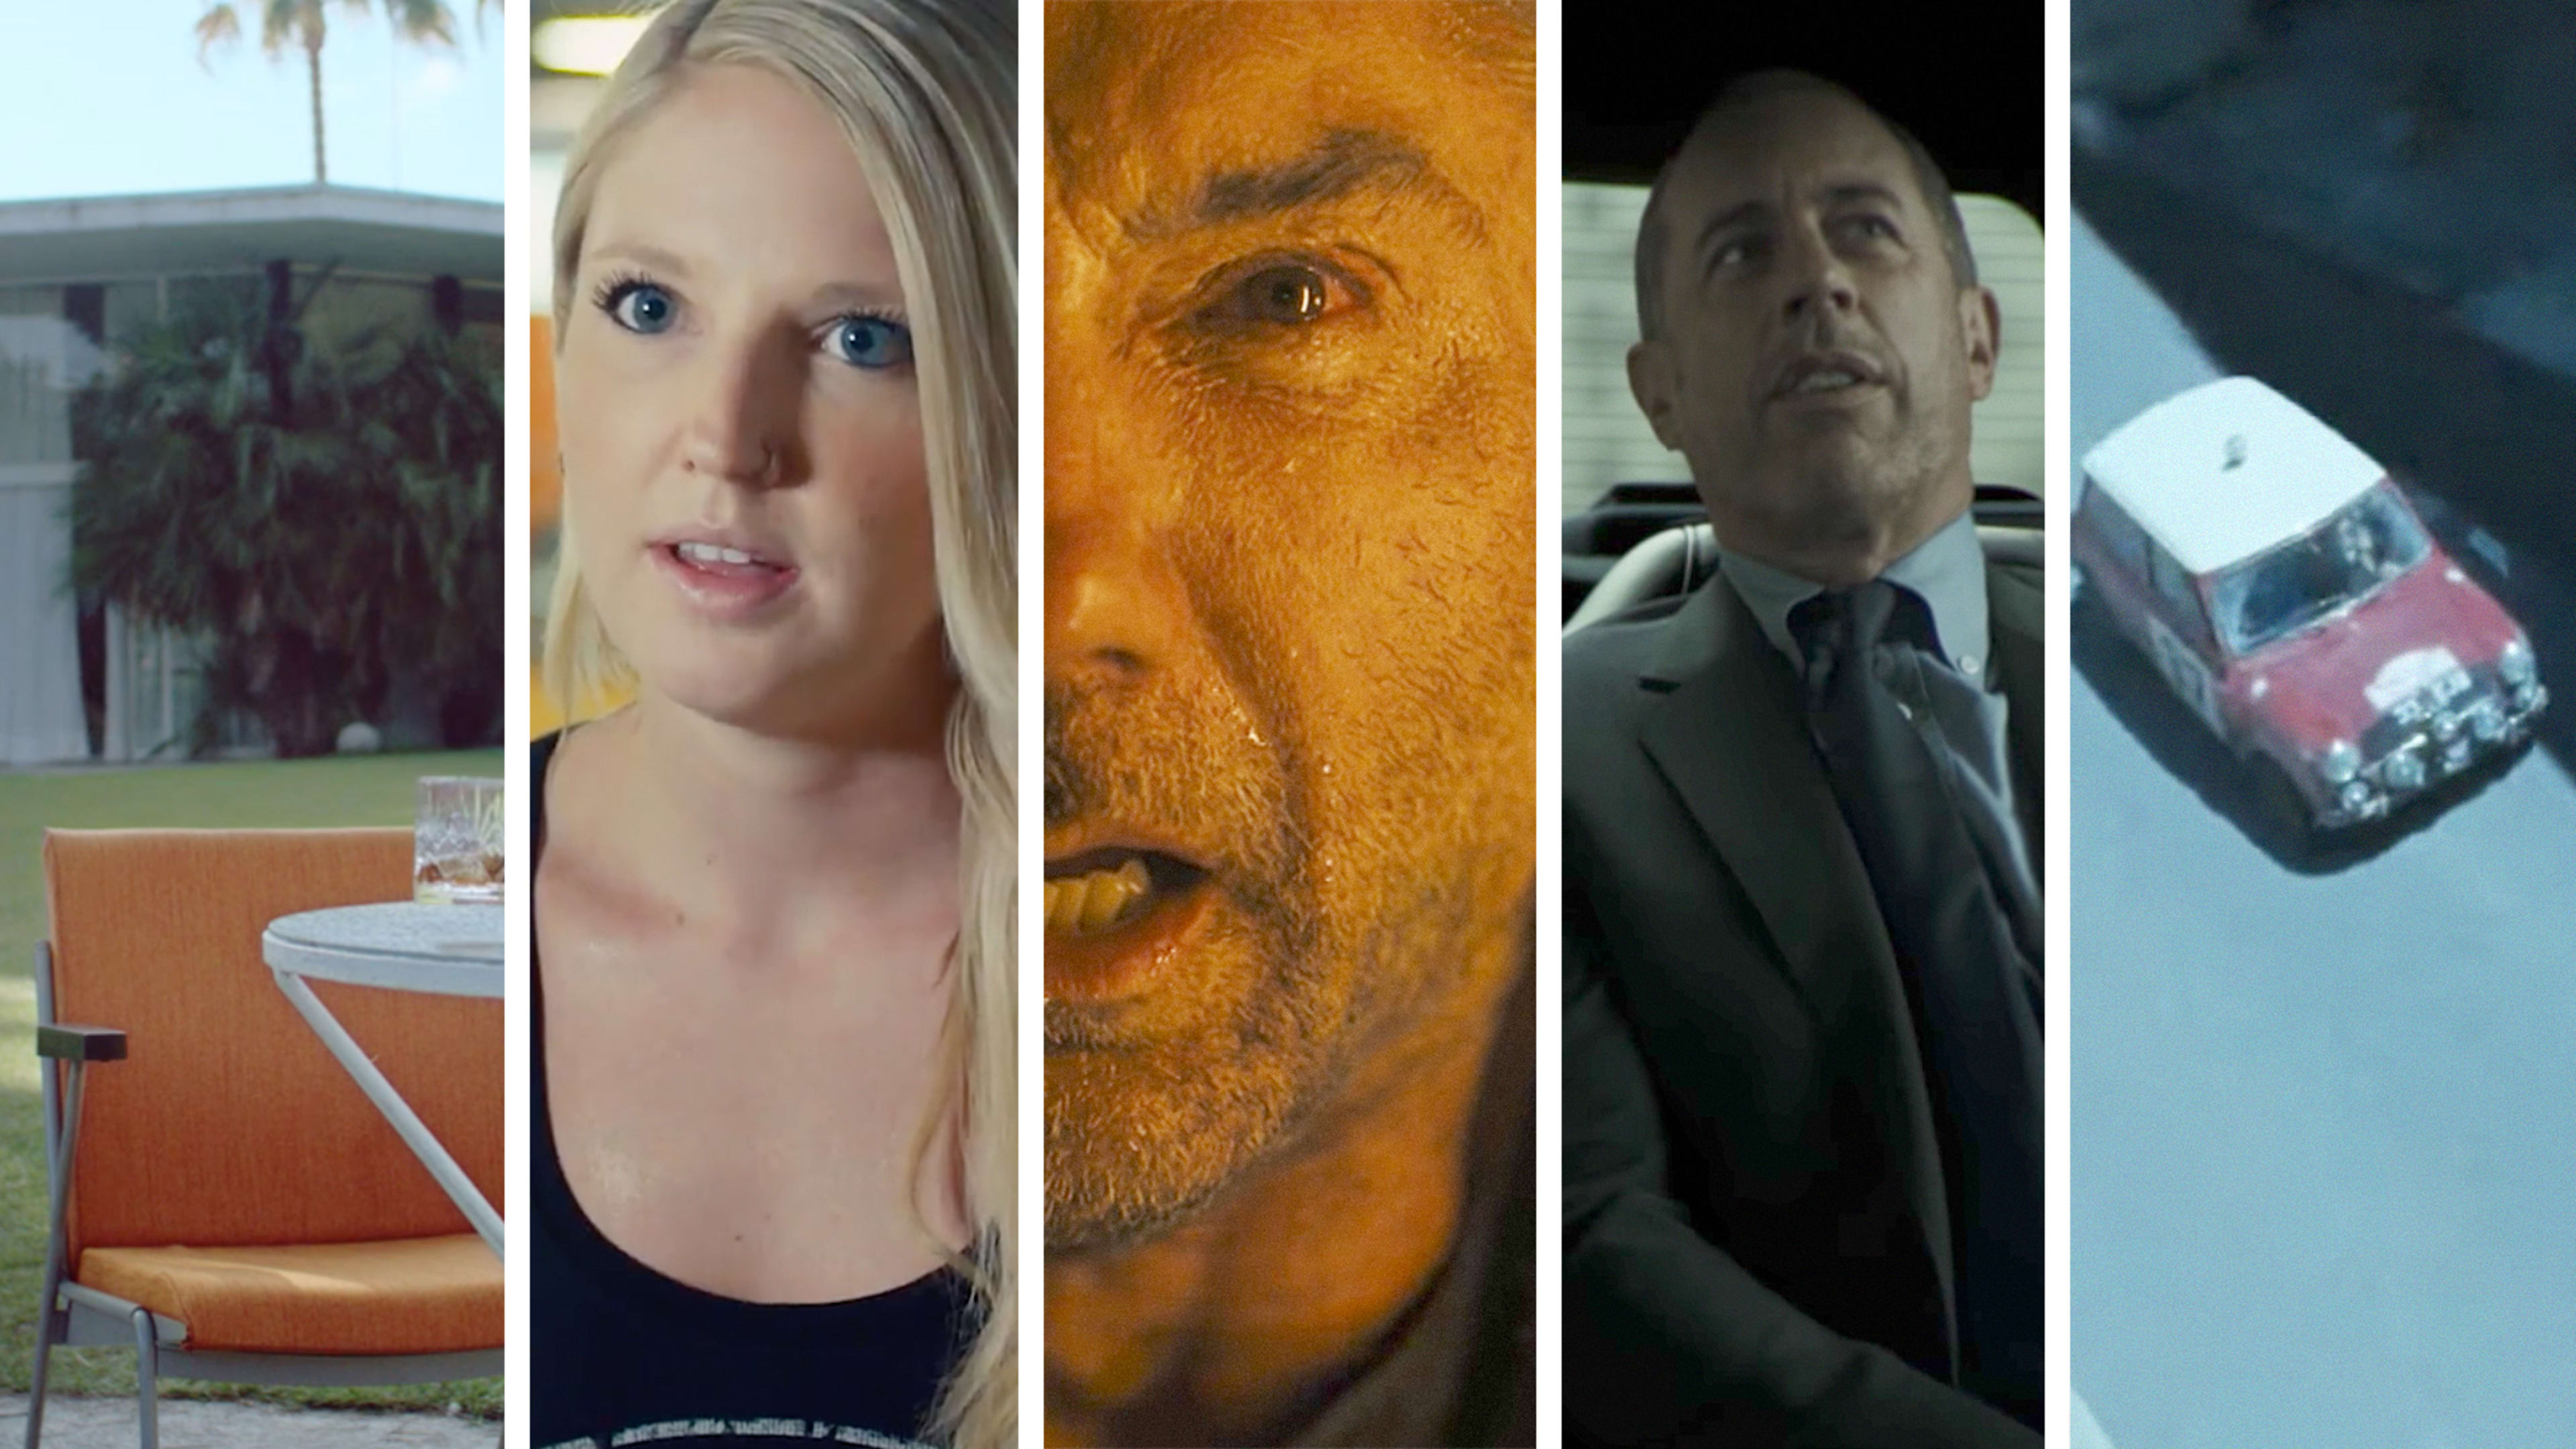 Seinfeld’s House Of Cards, Another “Blade Runner” Prologue: Top 5 Ads Of The Week